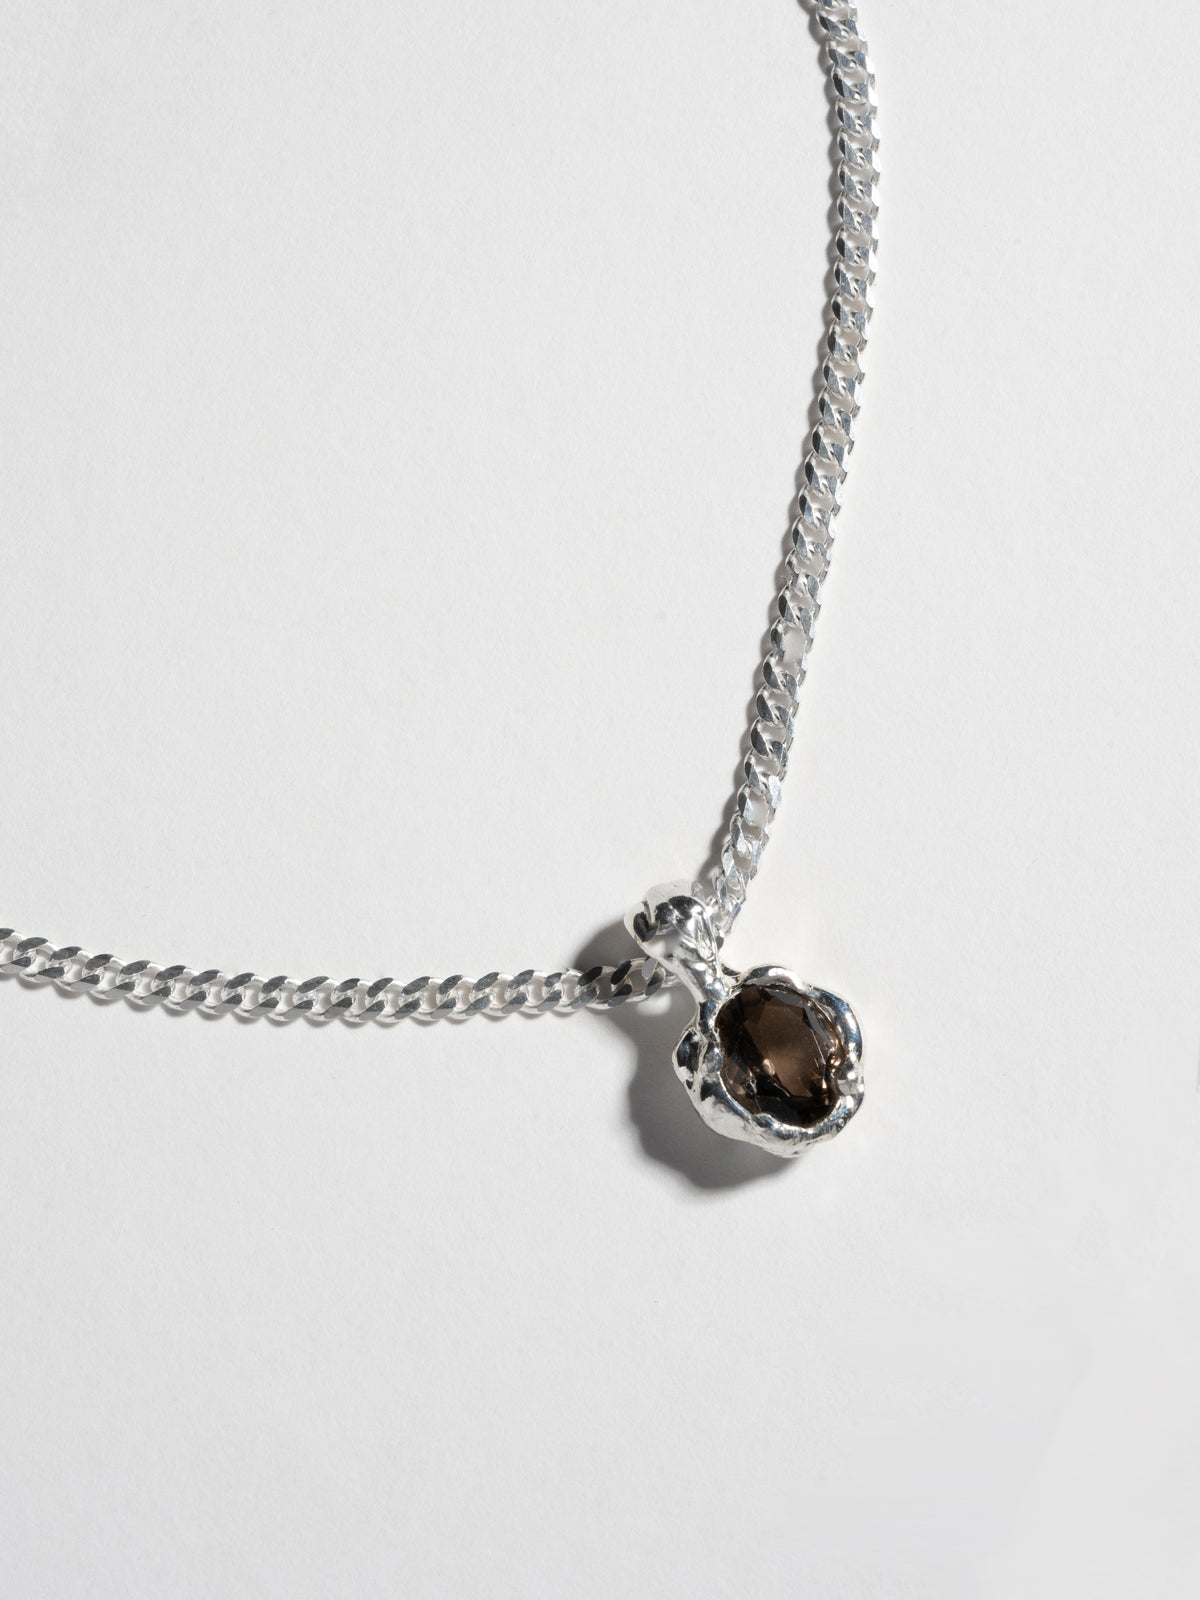 Close up of PRINCE Necklace pendant in sterling silver and smokey quartz